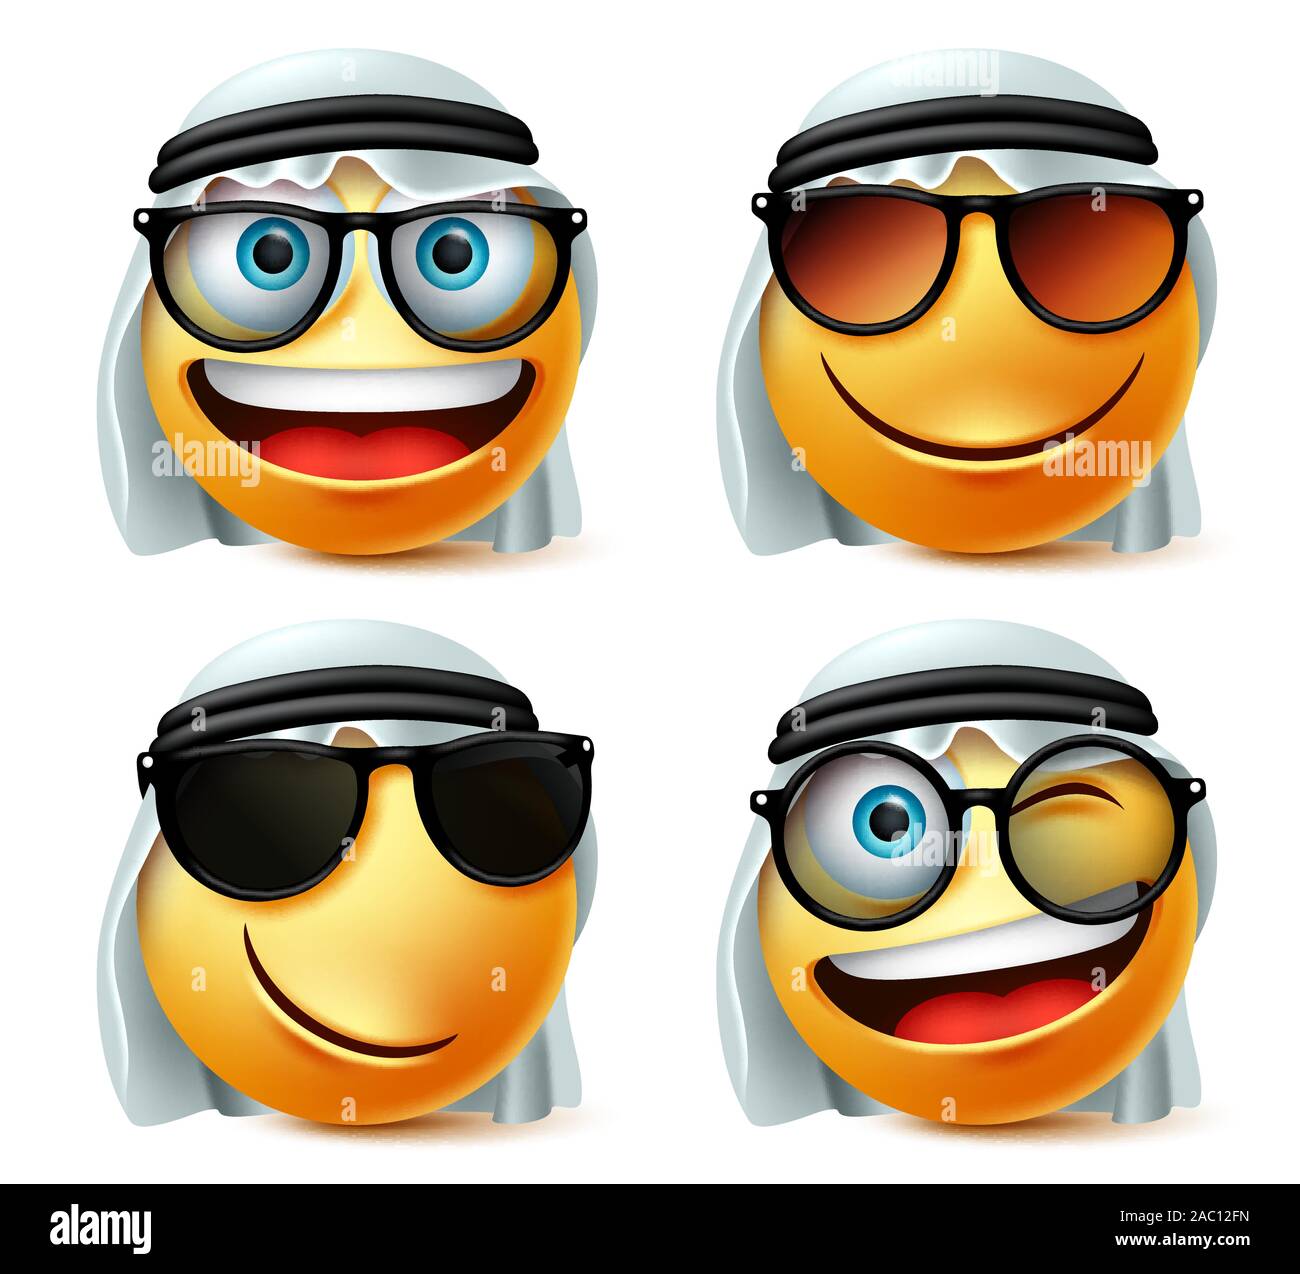 Smiley Arab saudi with glasses vector set. Saudi arab smiley face emoticon wearing sunglasses, eyeglasses and ghutra in naughty, happy and smiling. Stock Vector